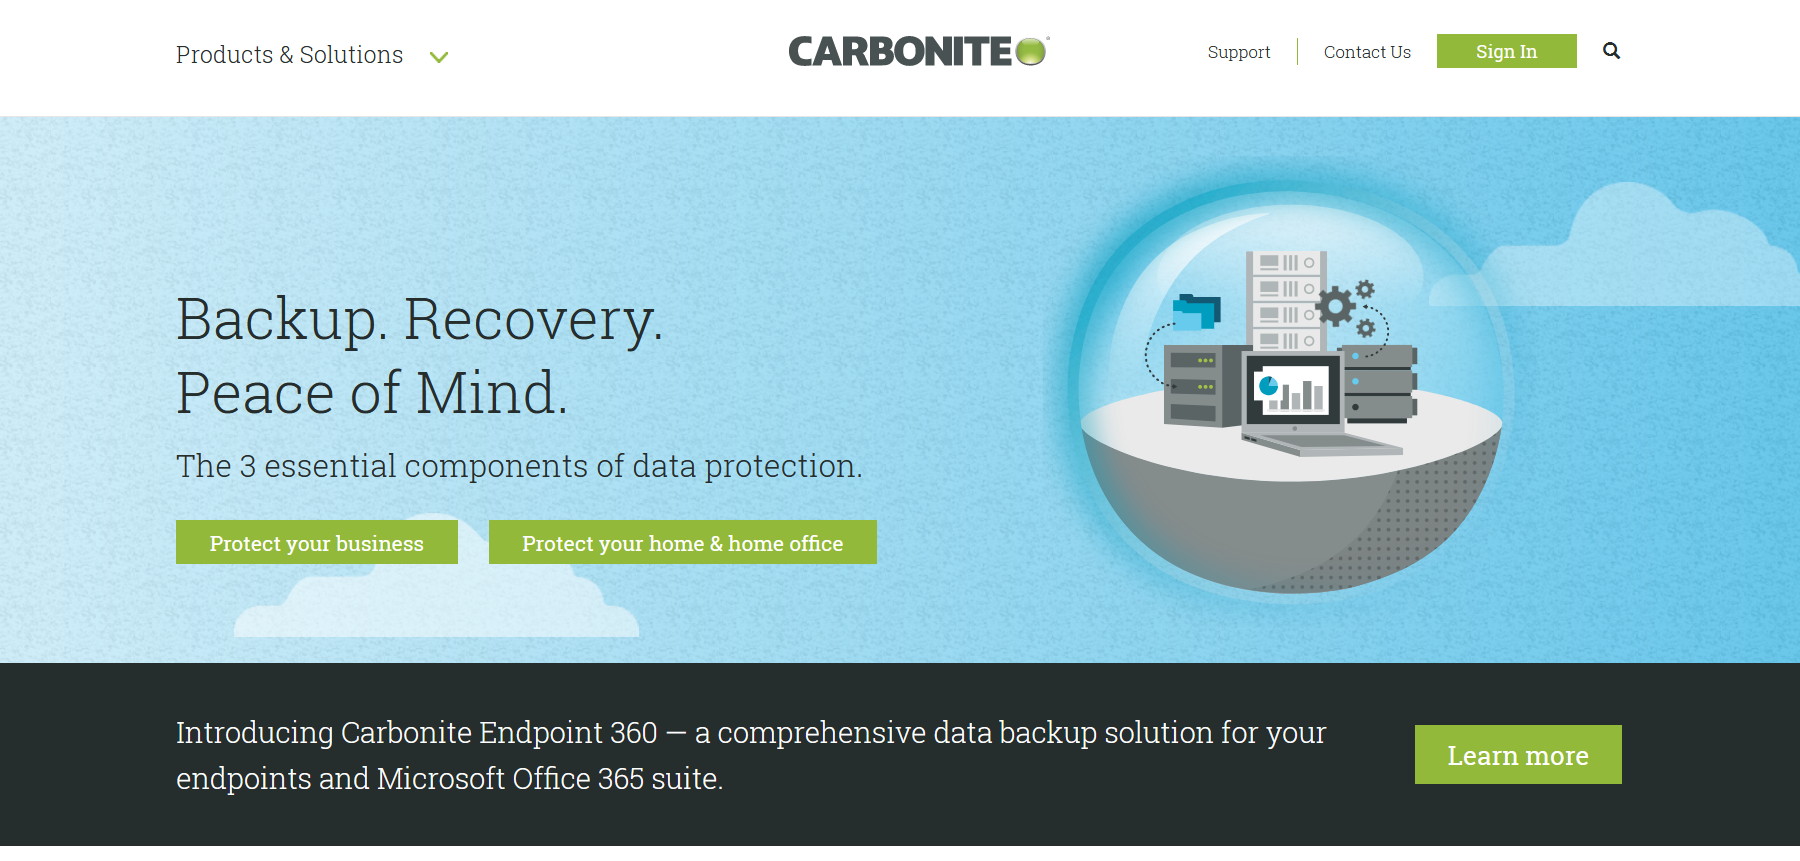 cost of carbonite backup